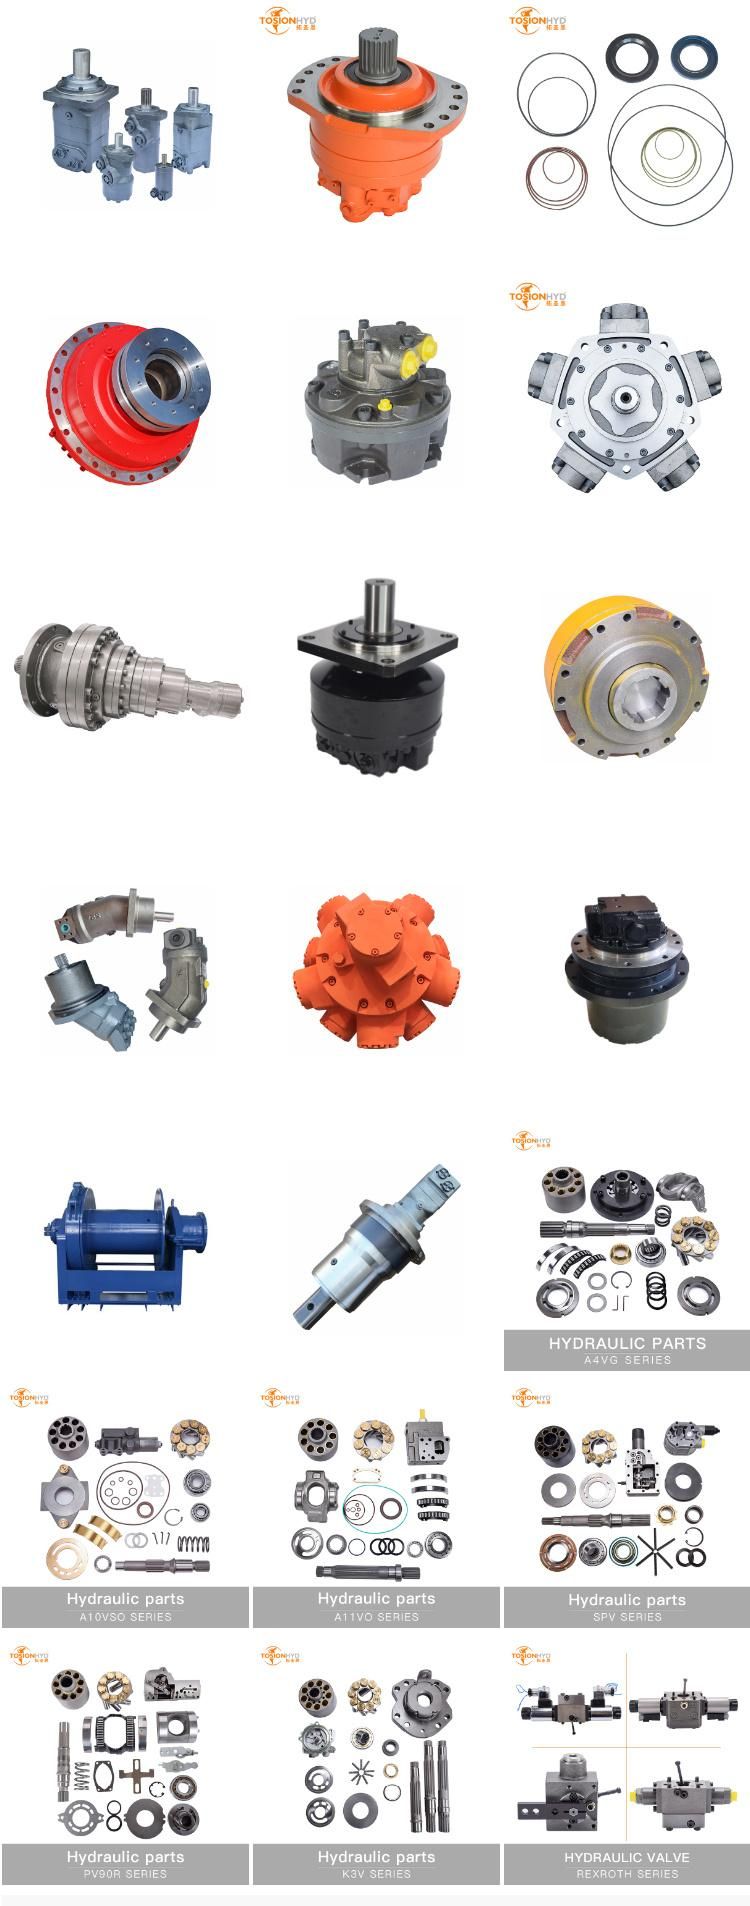 A7vo 55 Hydraulic Pump Parts with Rexroth Spare Repair Kits